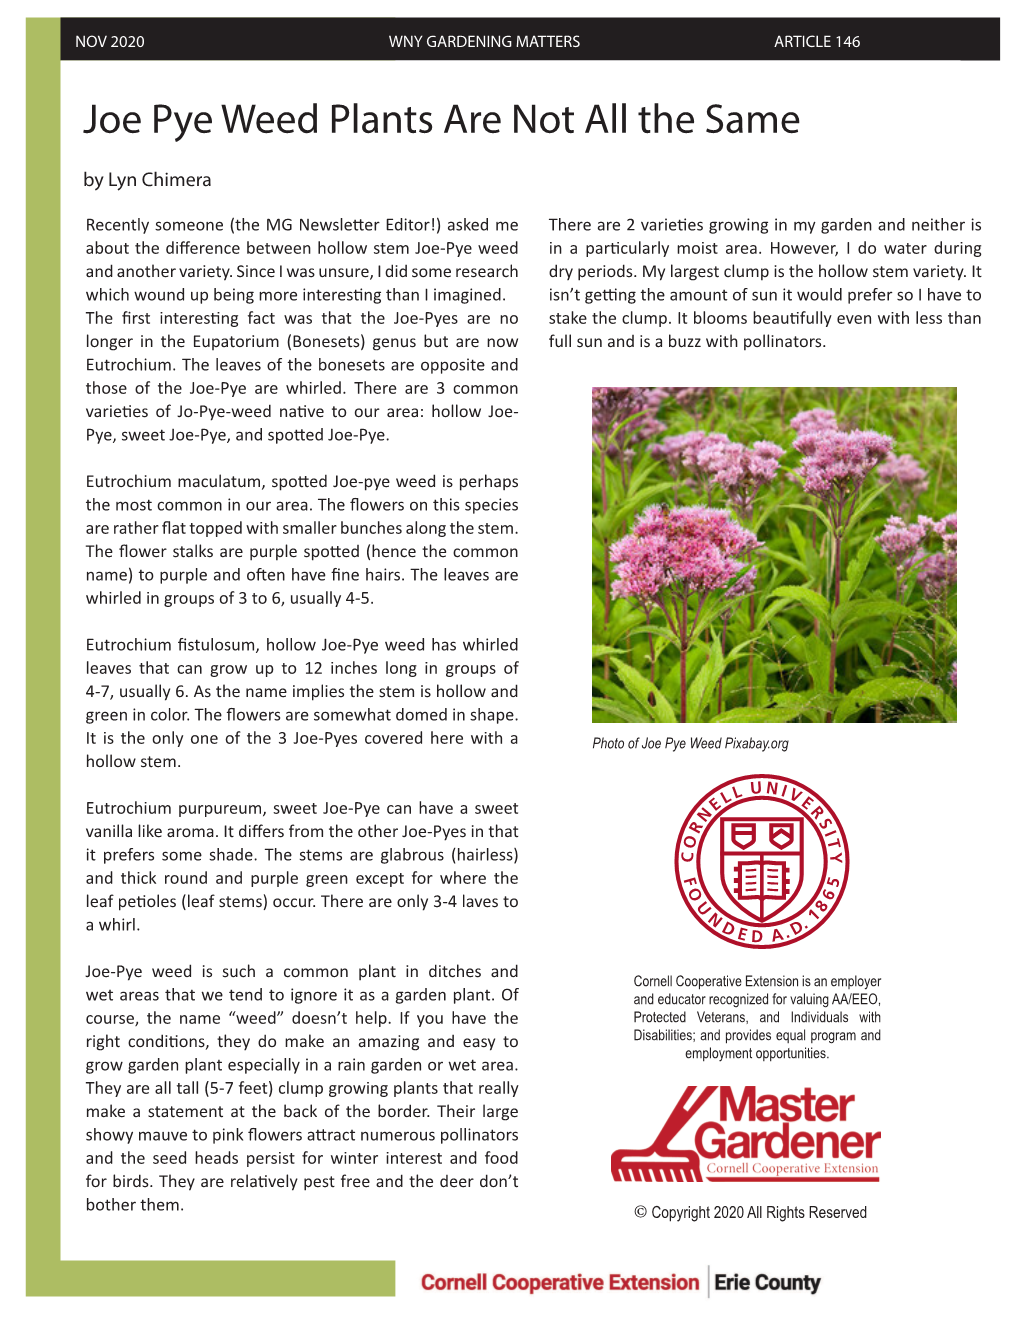 Joe Pye Weed Plants Are Not All the Same by Lyn Chimera